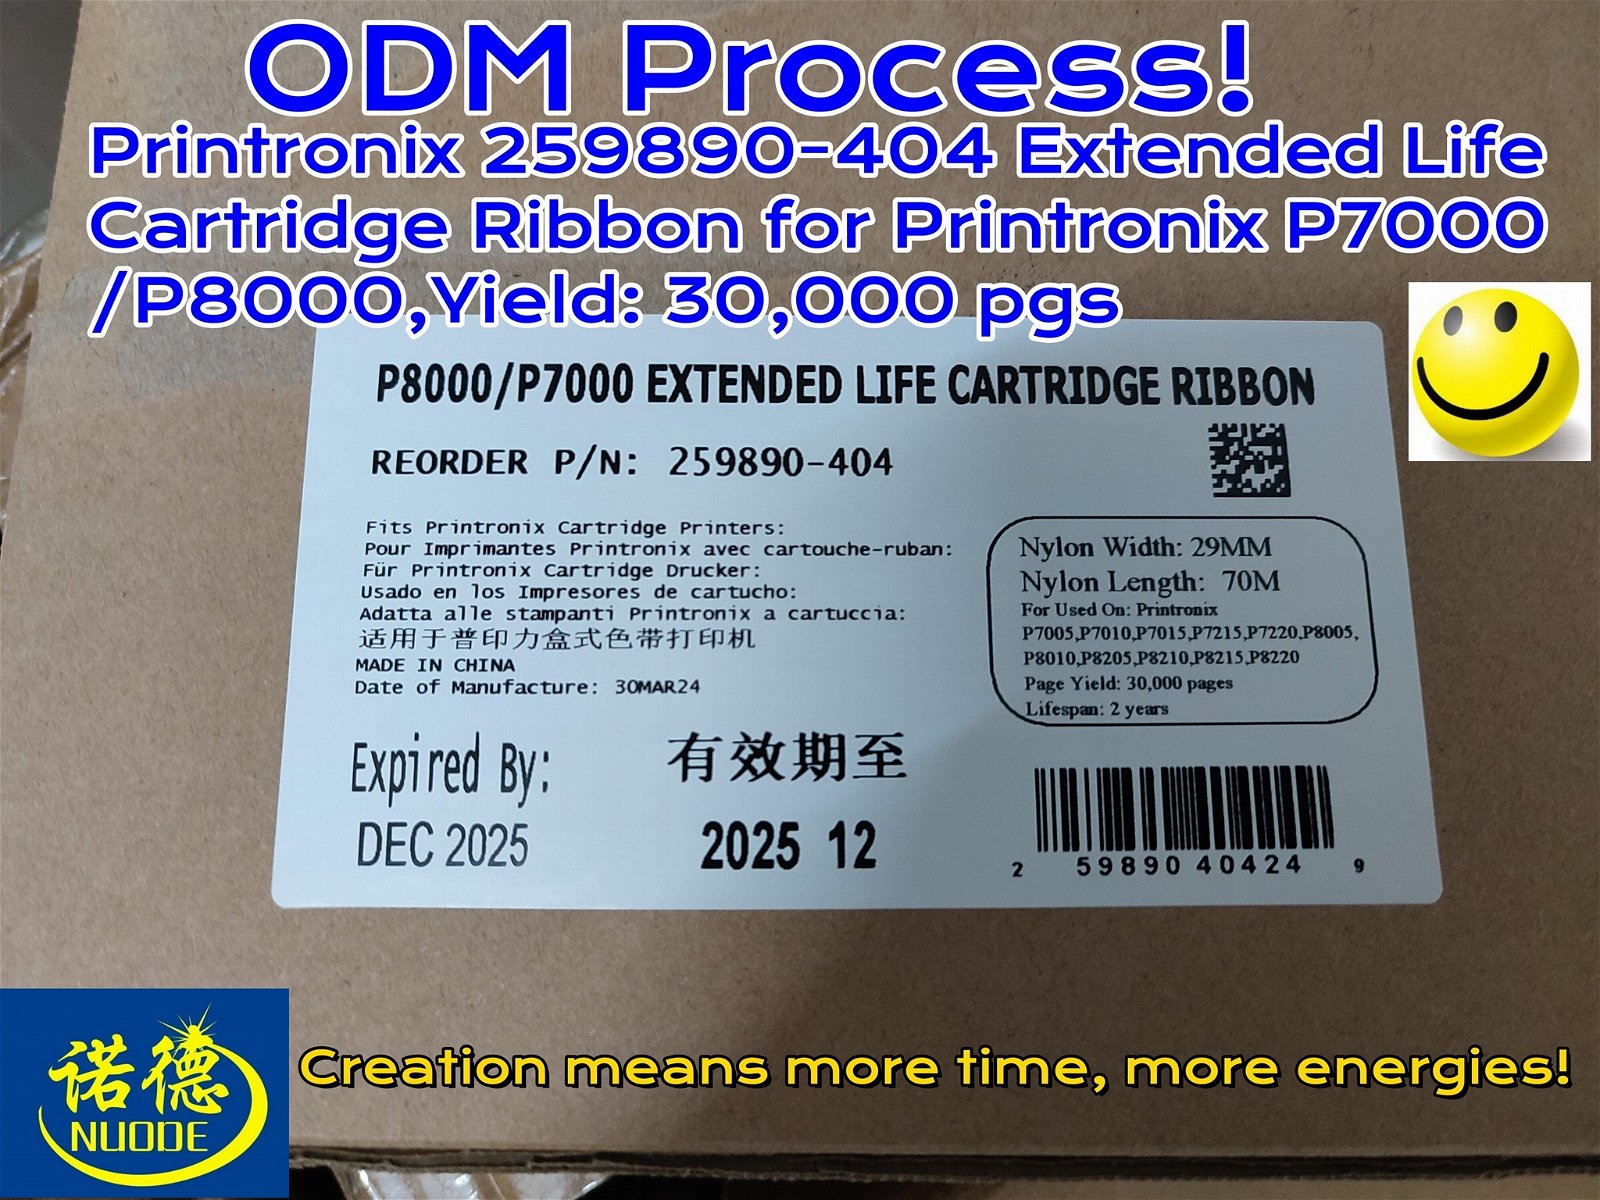 259890-404 Extended Life Cartridge Ribbon 30k pages for Printronix P7000/P8000